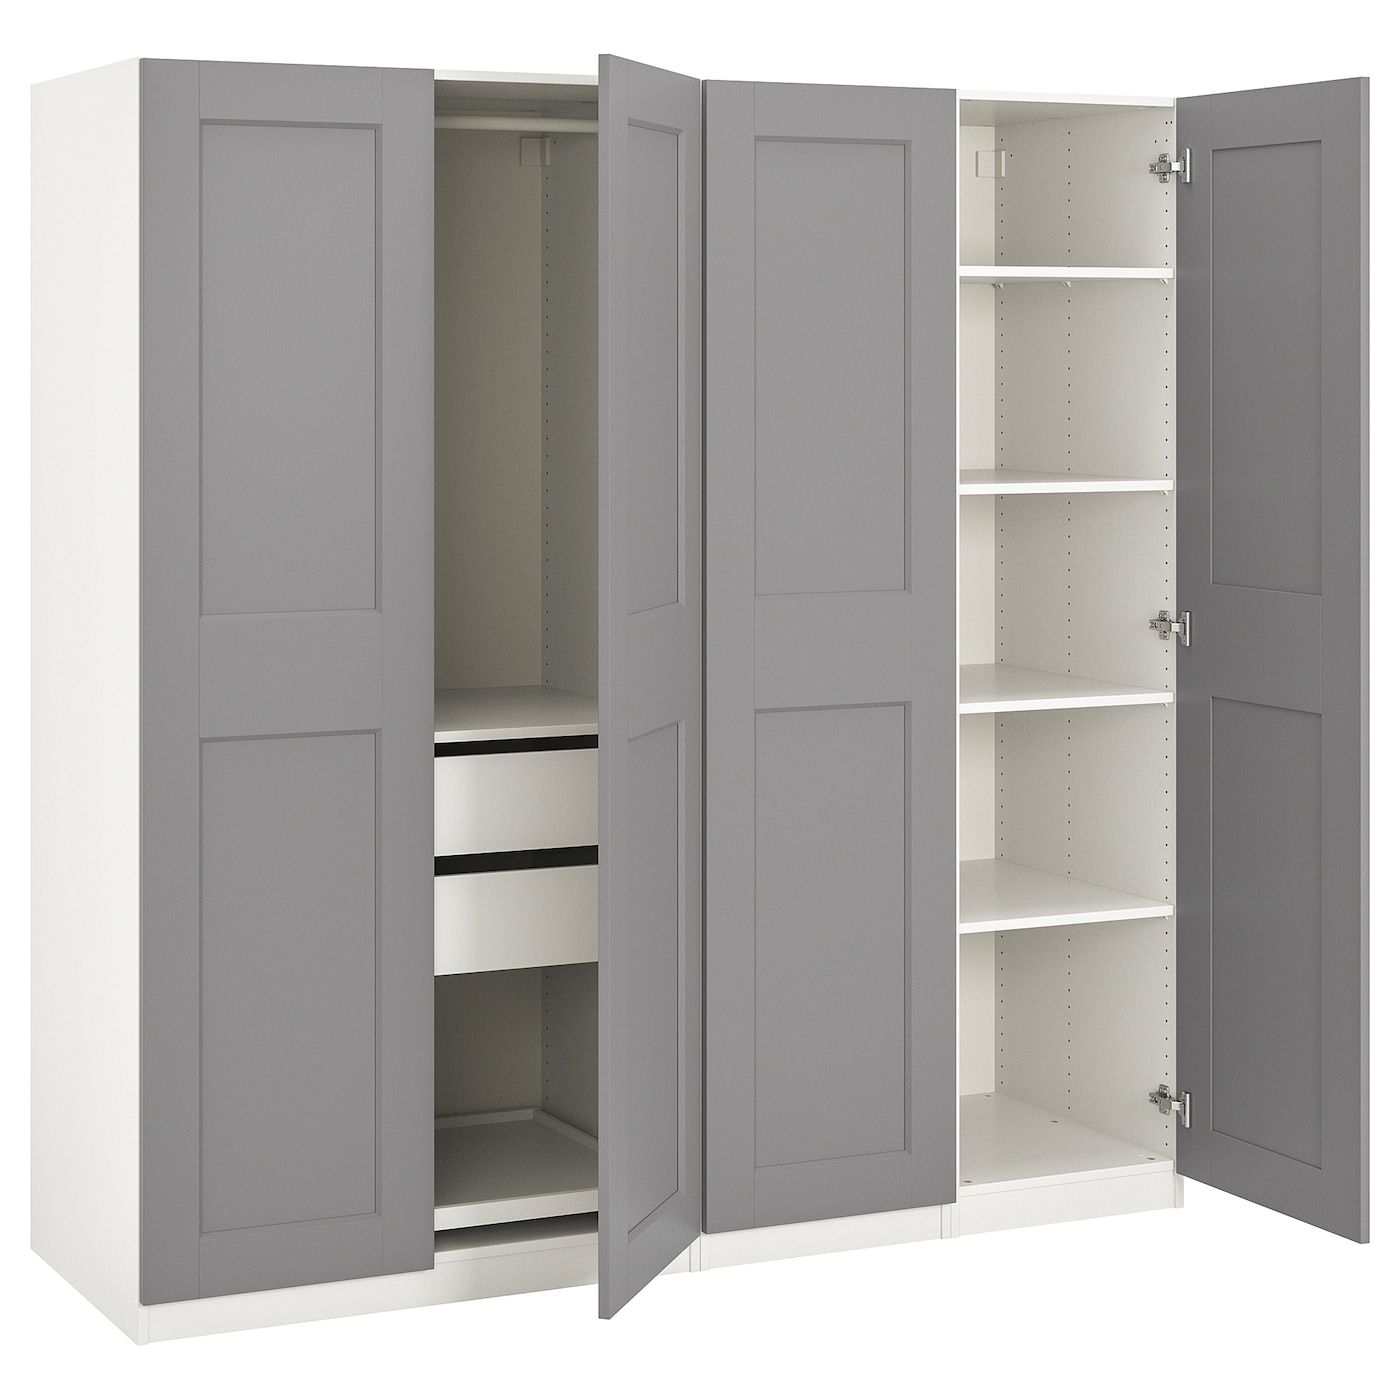 Pax / Grimo Wardrobe Combination, White/grimo Gray, 783/4x235/8x791/4" –  Ikea With Grey Wardrobes (View 6 of 20)